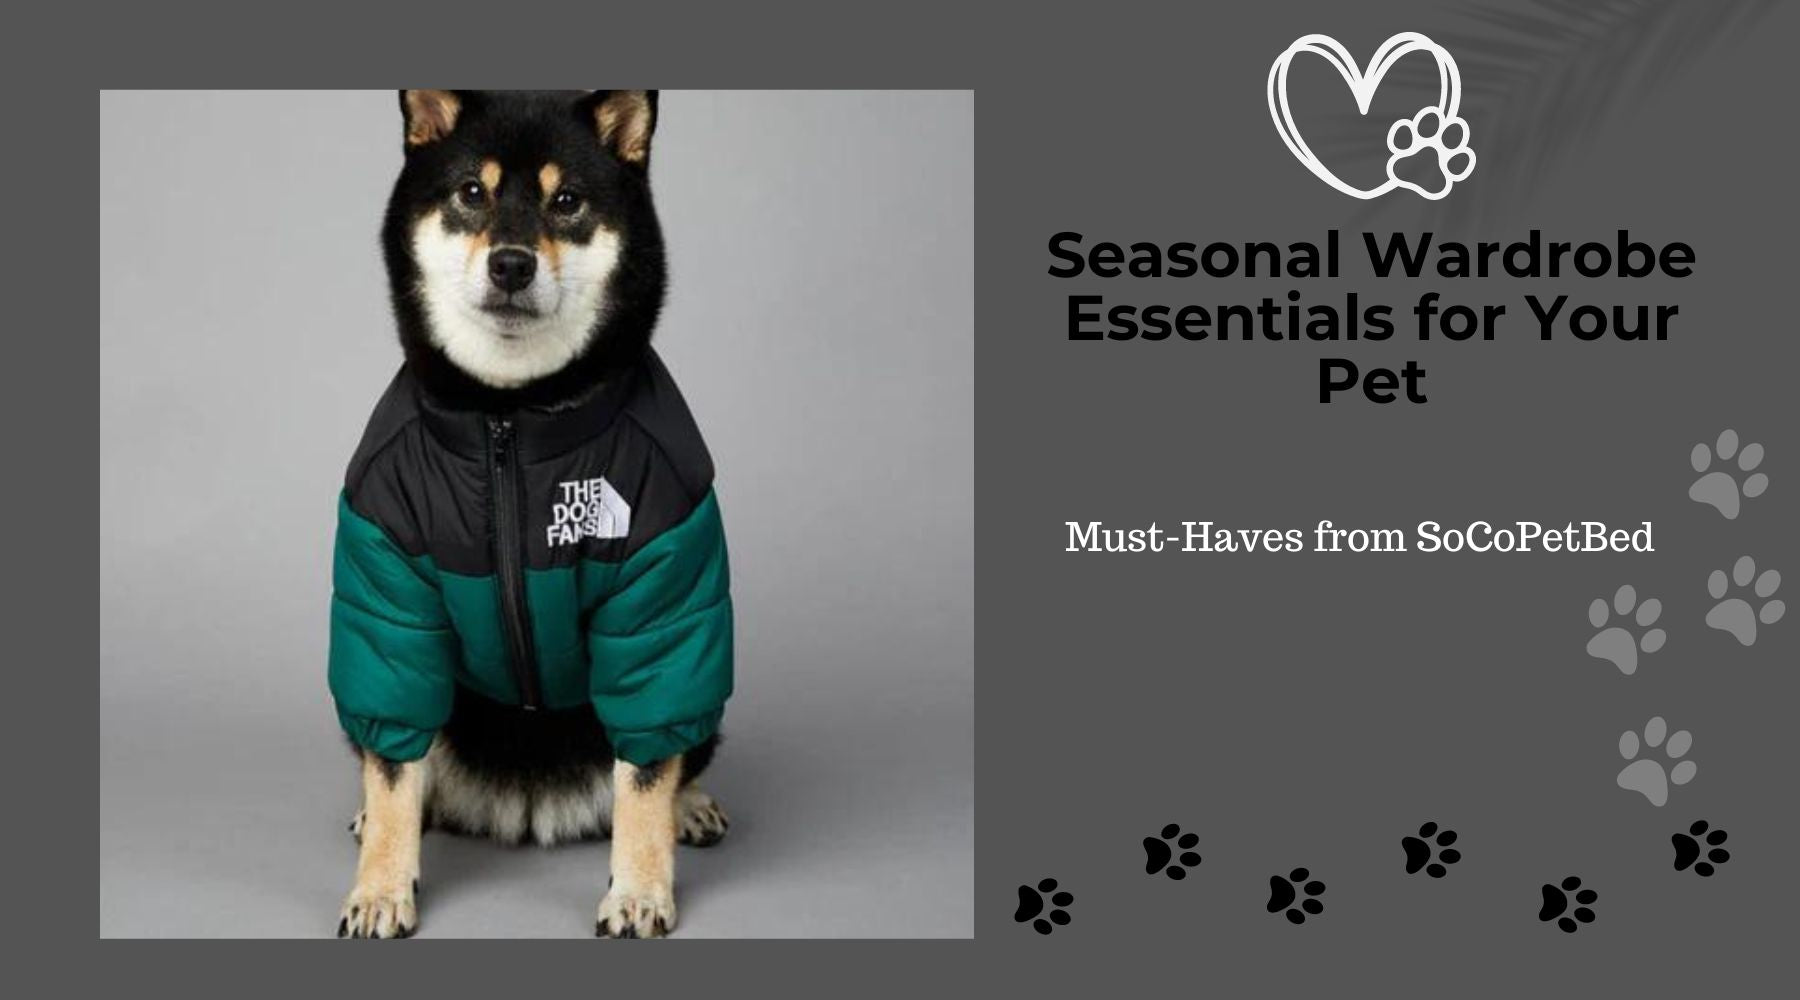 Seasonal Wardrobe Essentials for Your Pet: Must-Haves from SoCoPetBed